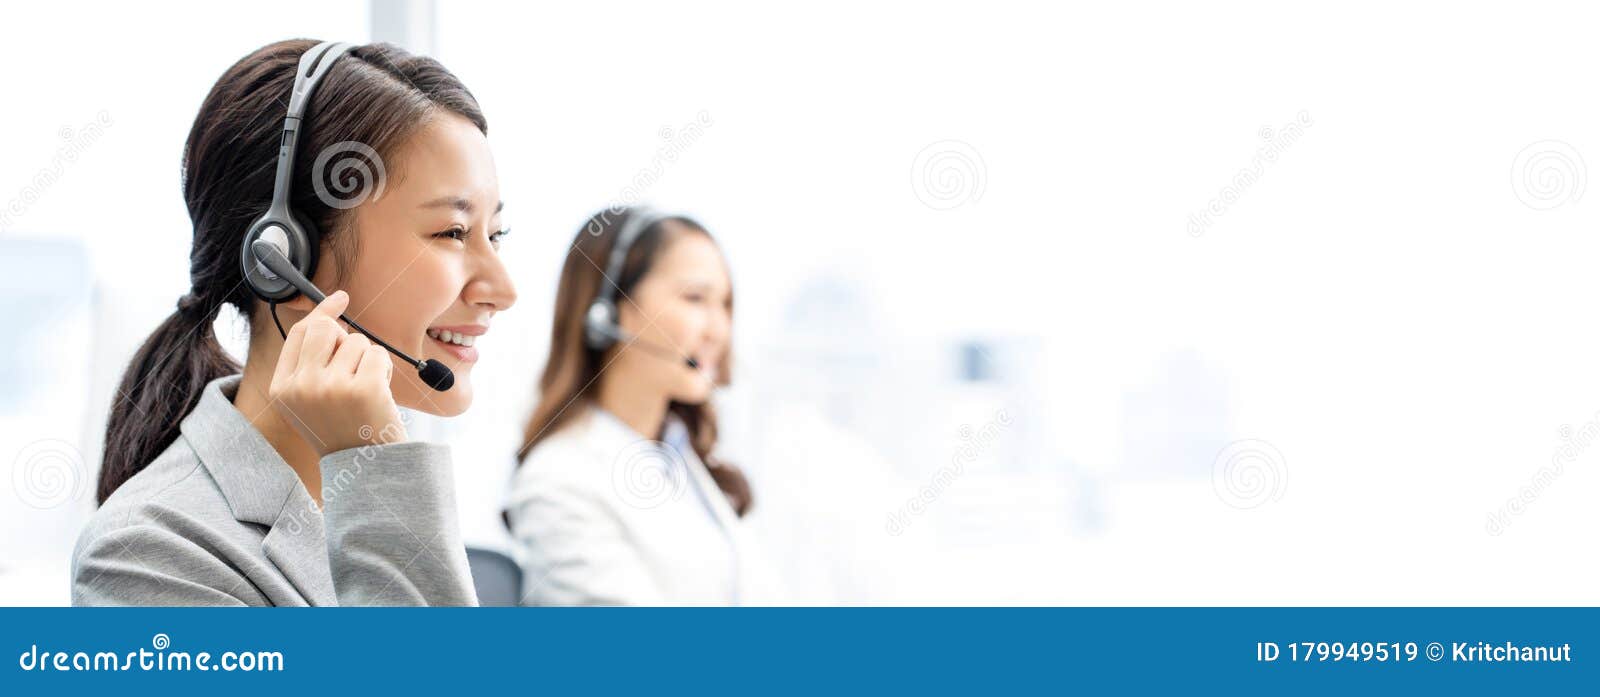 banner of smiling telemarketing asian woman in call center office